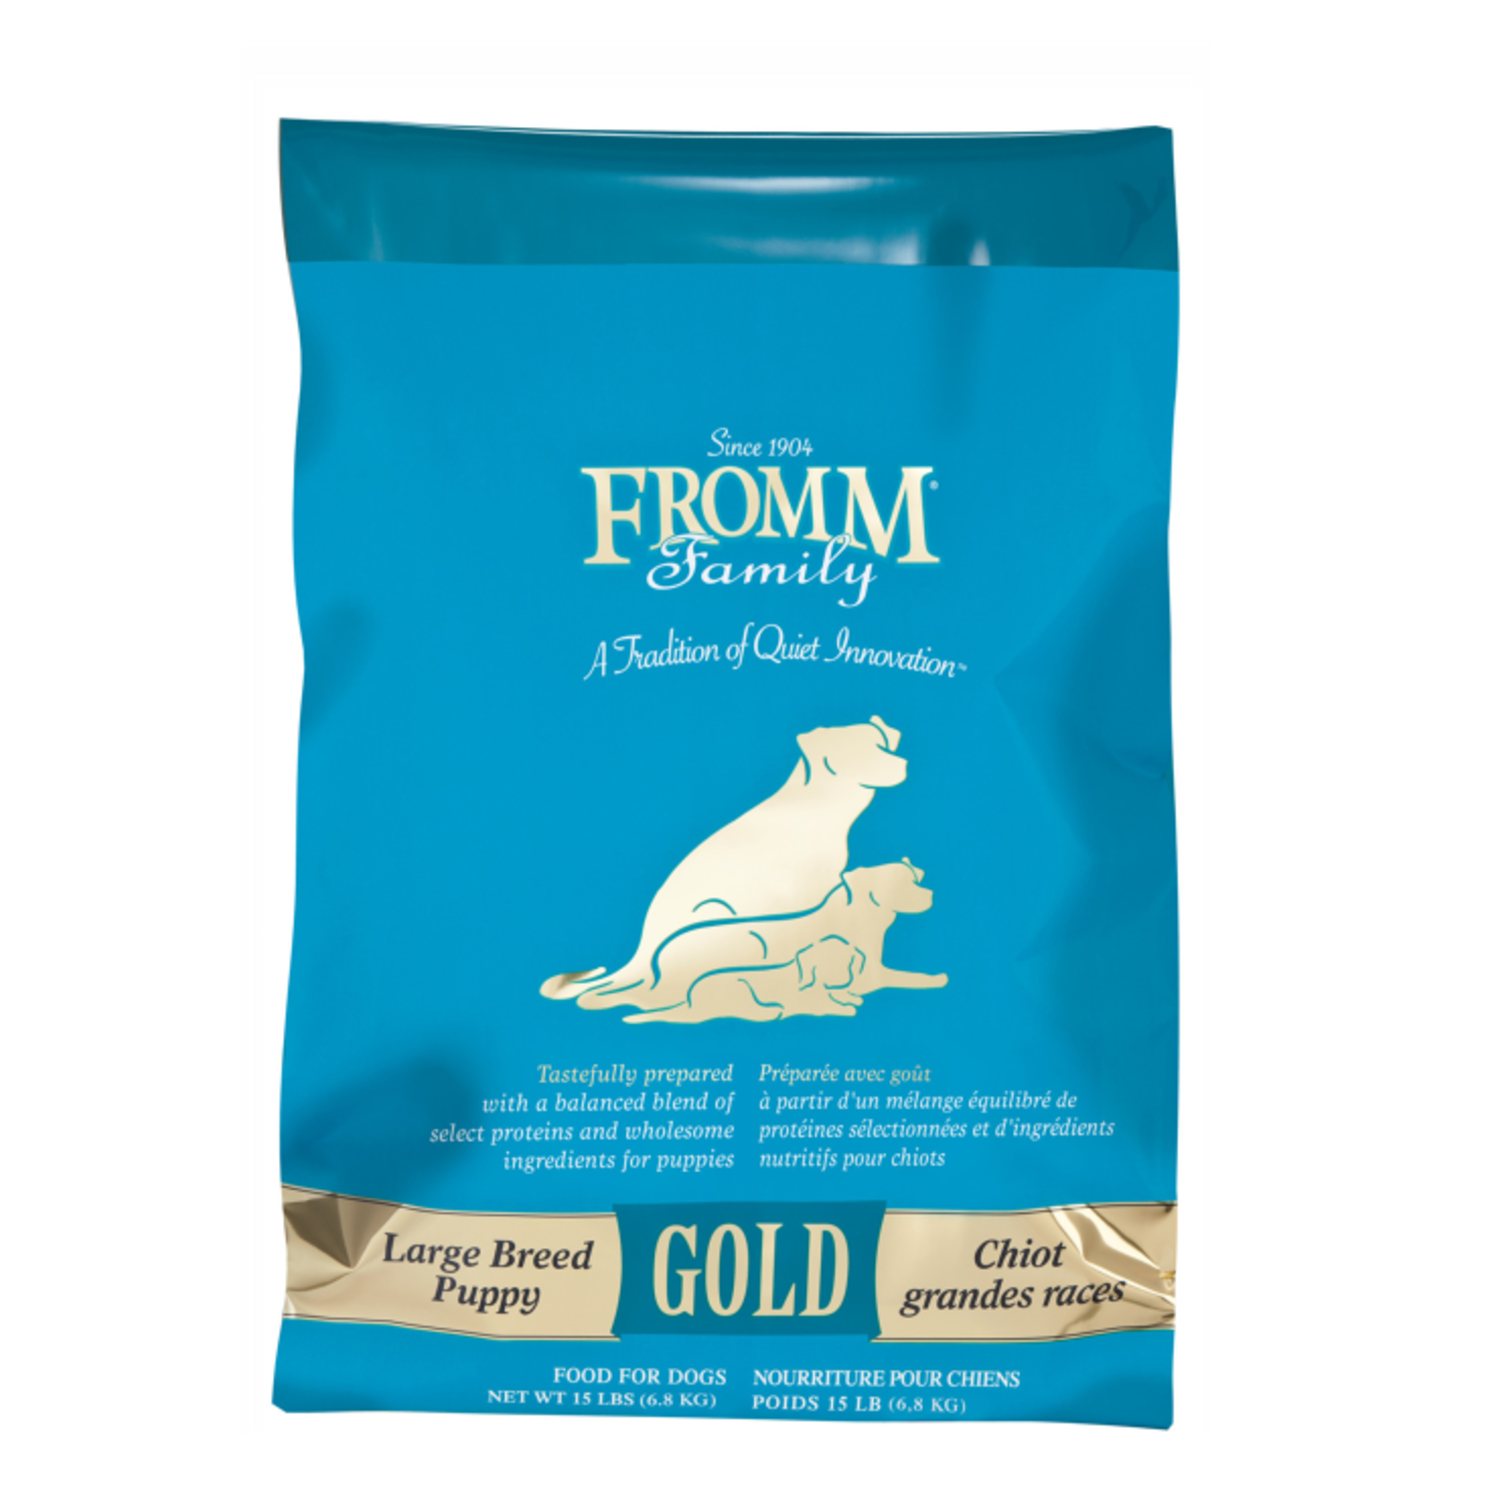 FROMM GOLD LARGE BREED PUPPY - Paws on Chicon